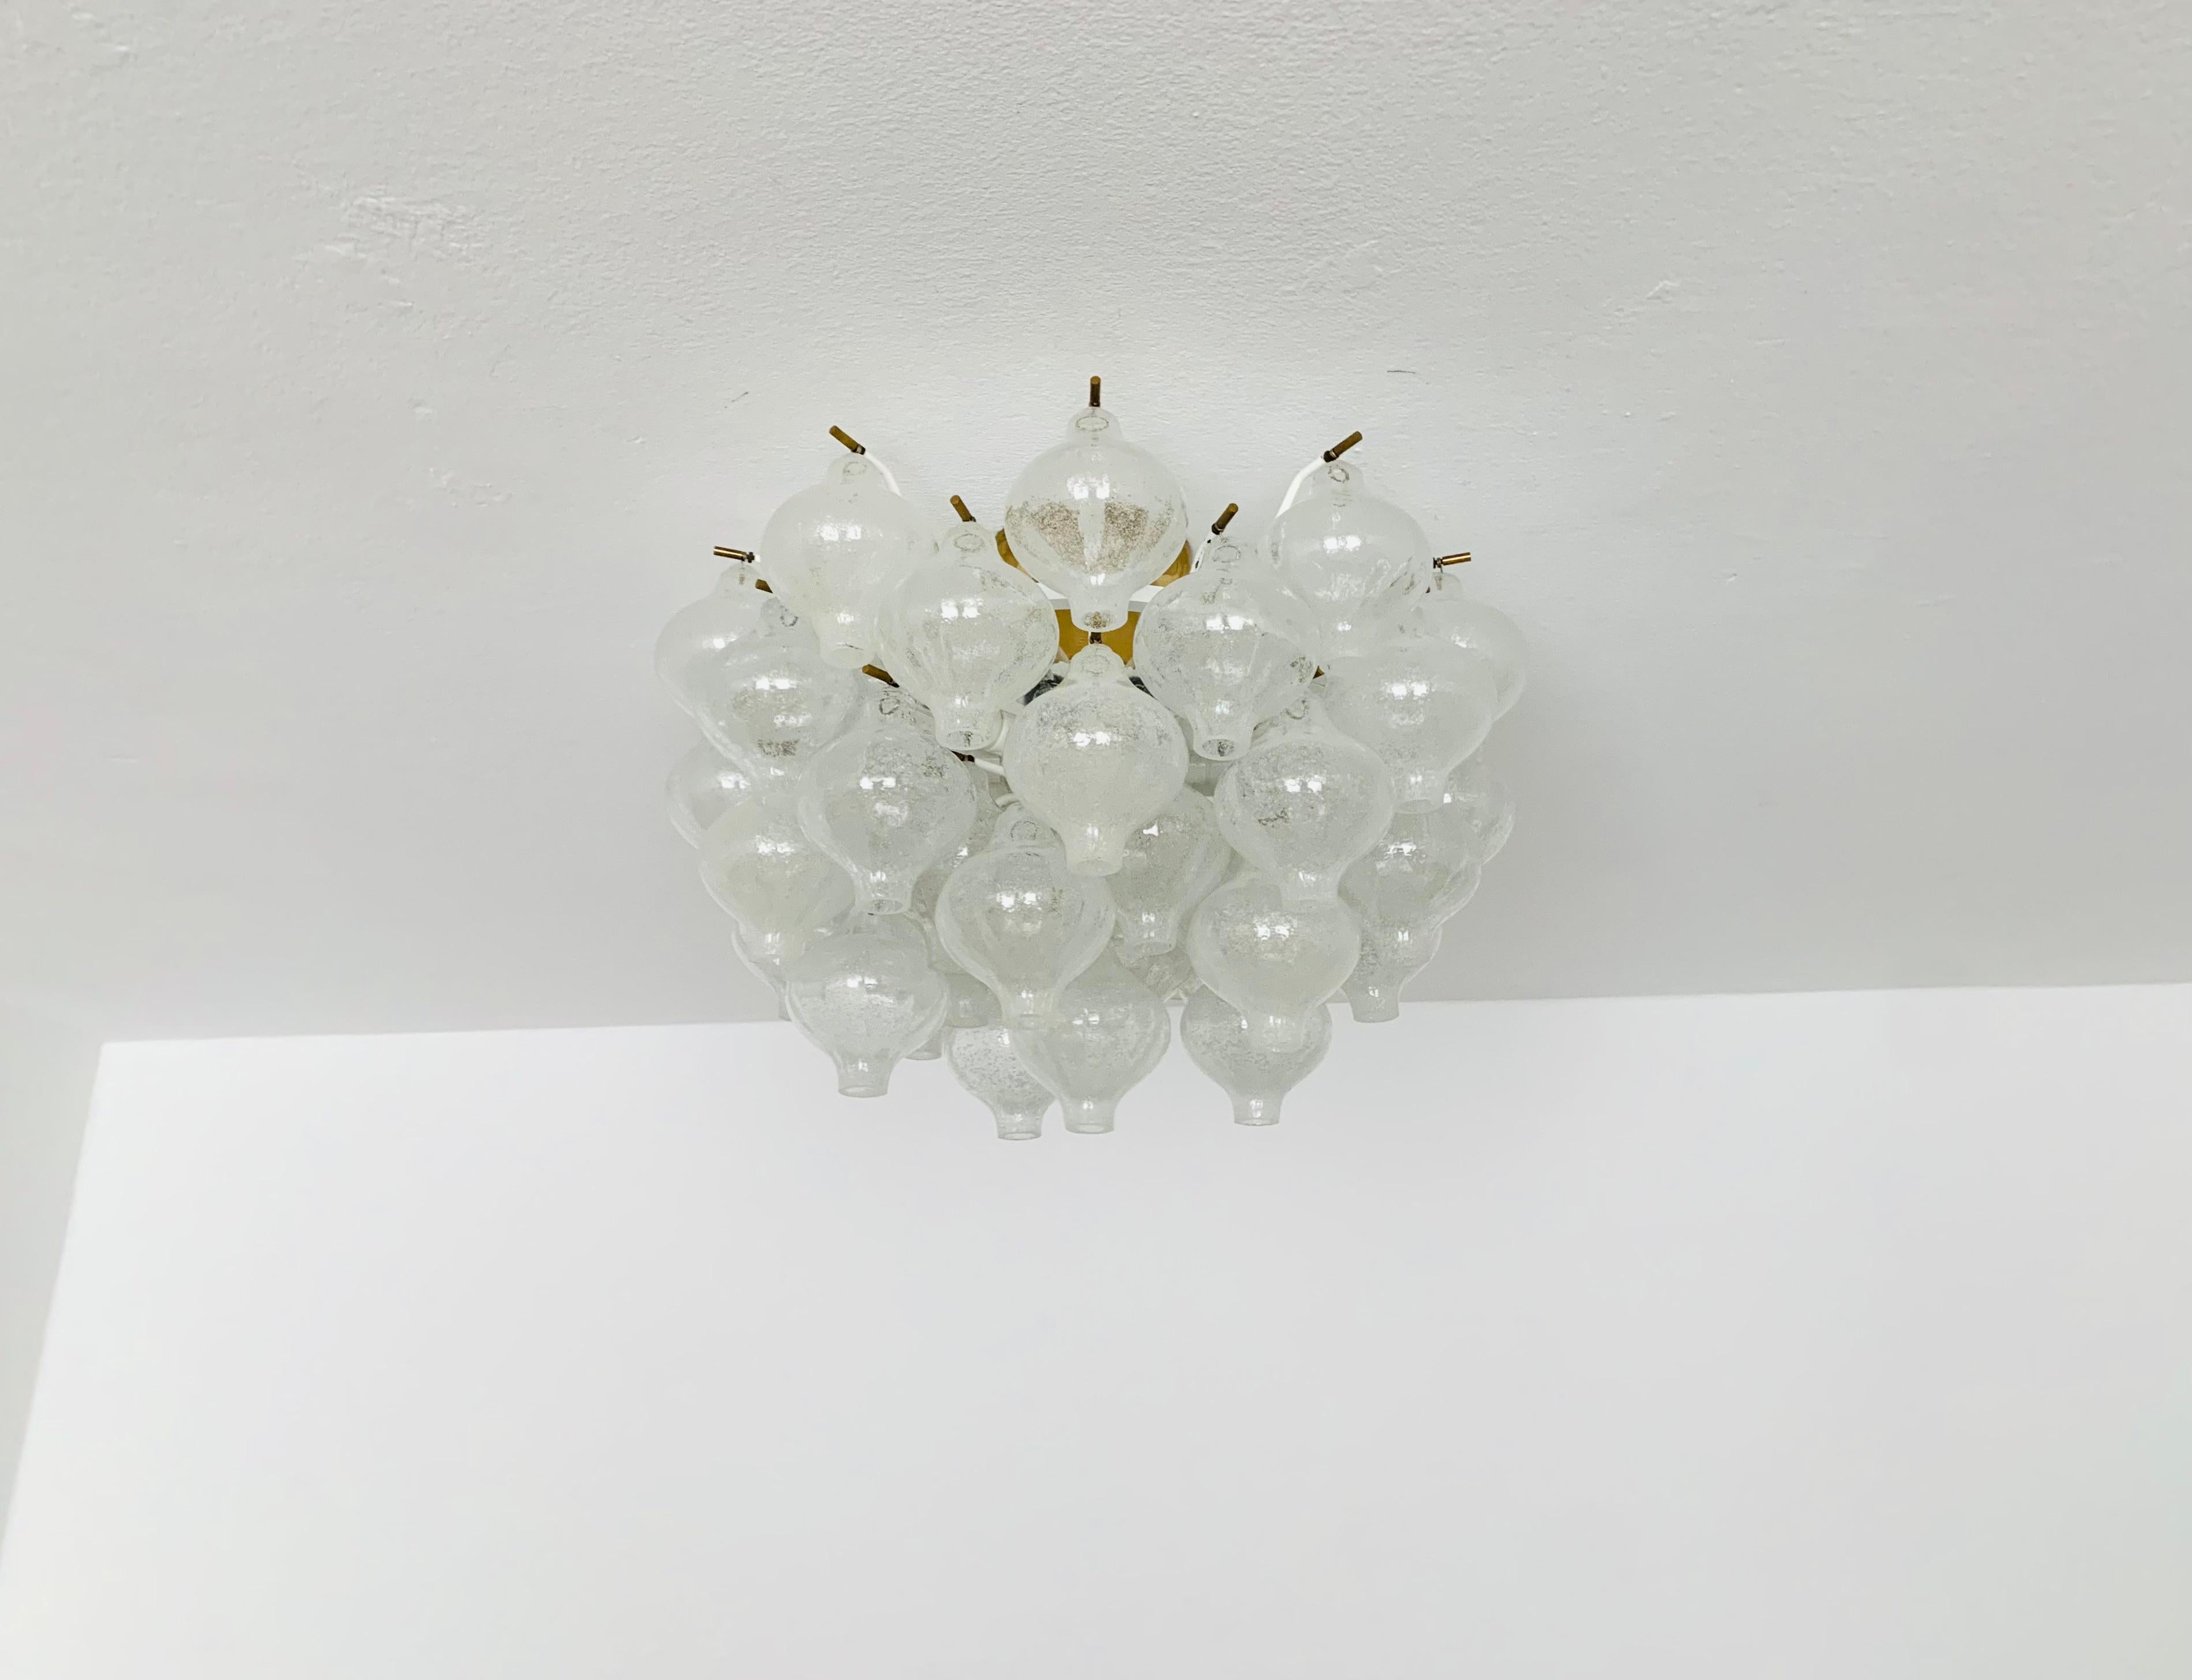 Wonderful Tulipan chandelier from the 1960s.
The 41 beautifully shaped Murano glass elements create an impressive, sparkling play of light.
Exceptionally high-quality workmanship.
Very noble and luxurious appearance and a real eye-catcher for